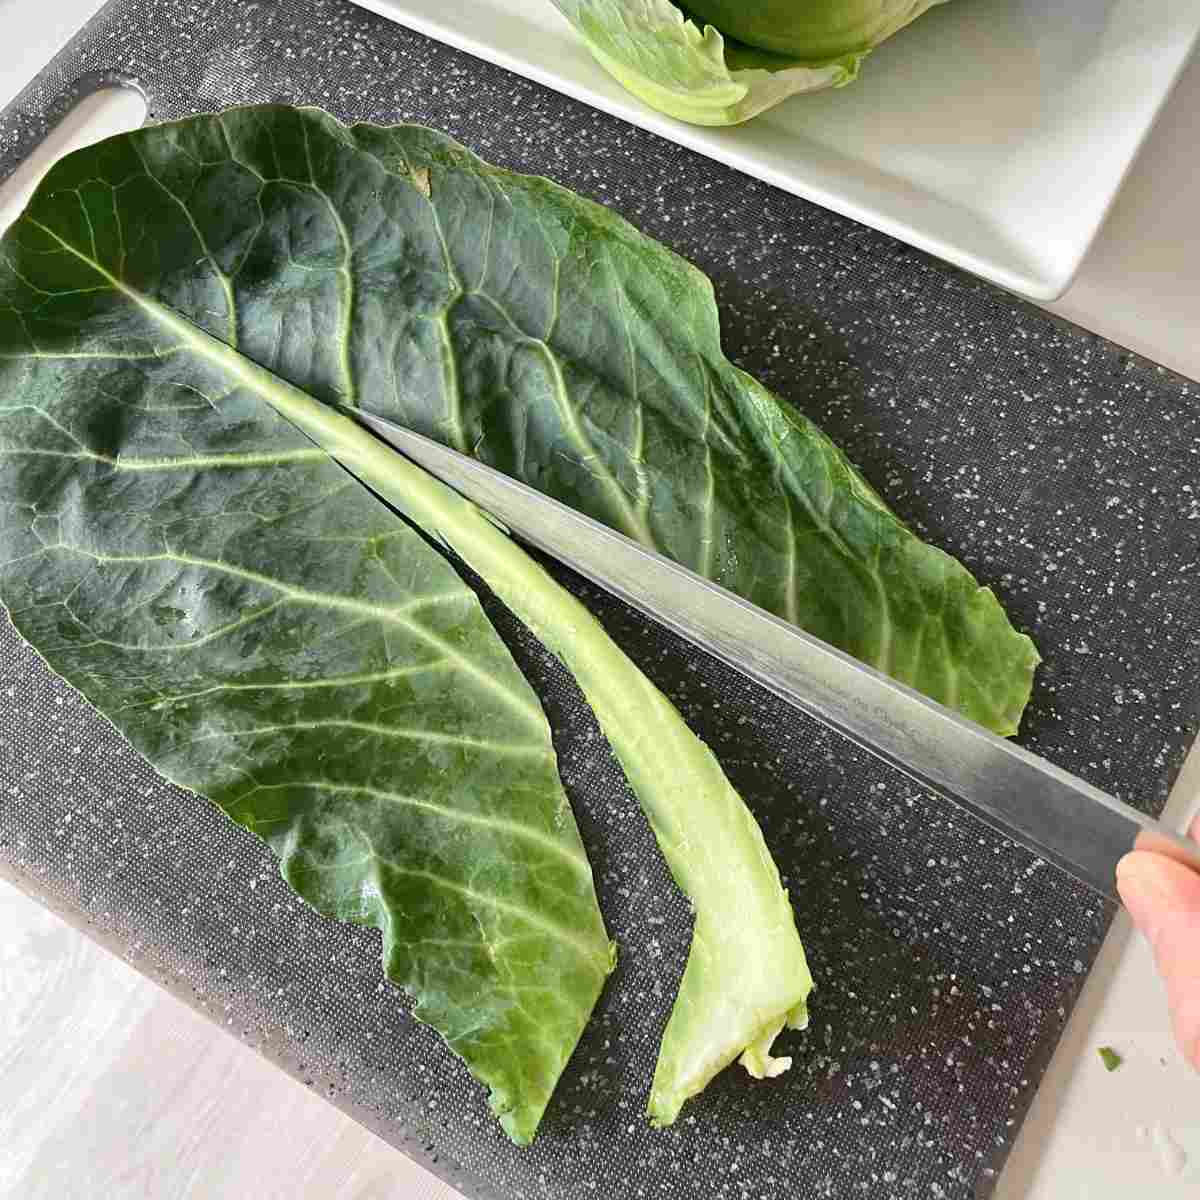 Cut out the hard centre stem cabbage leaves